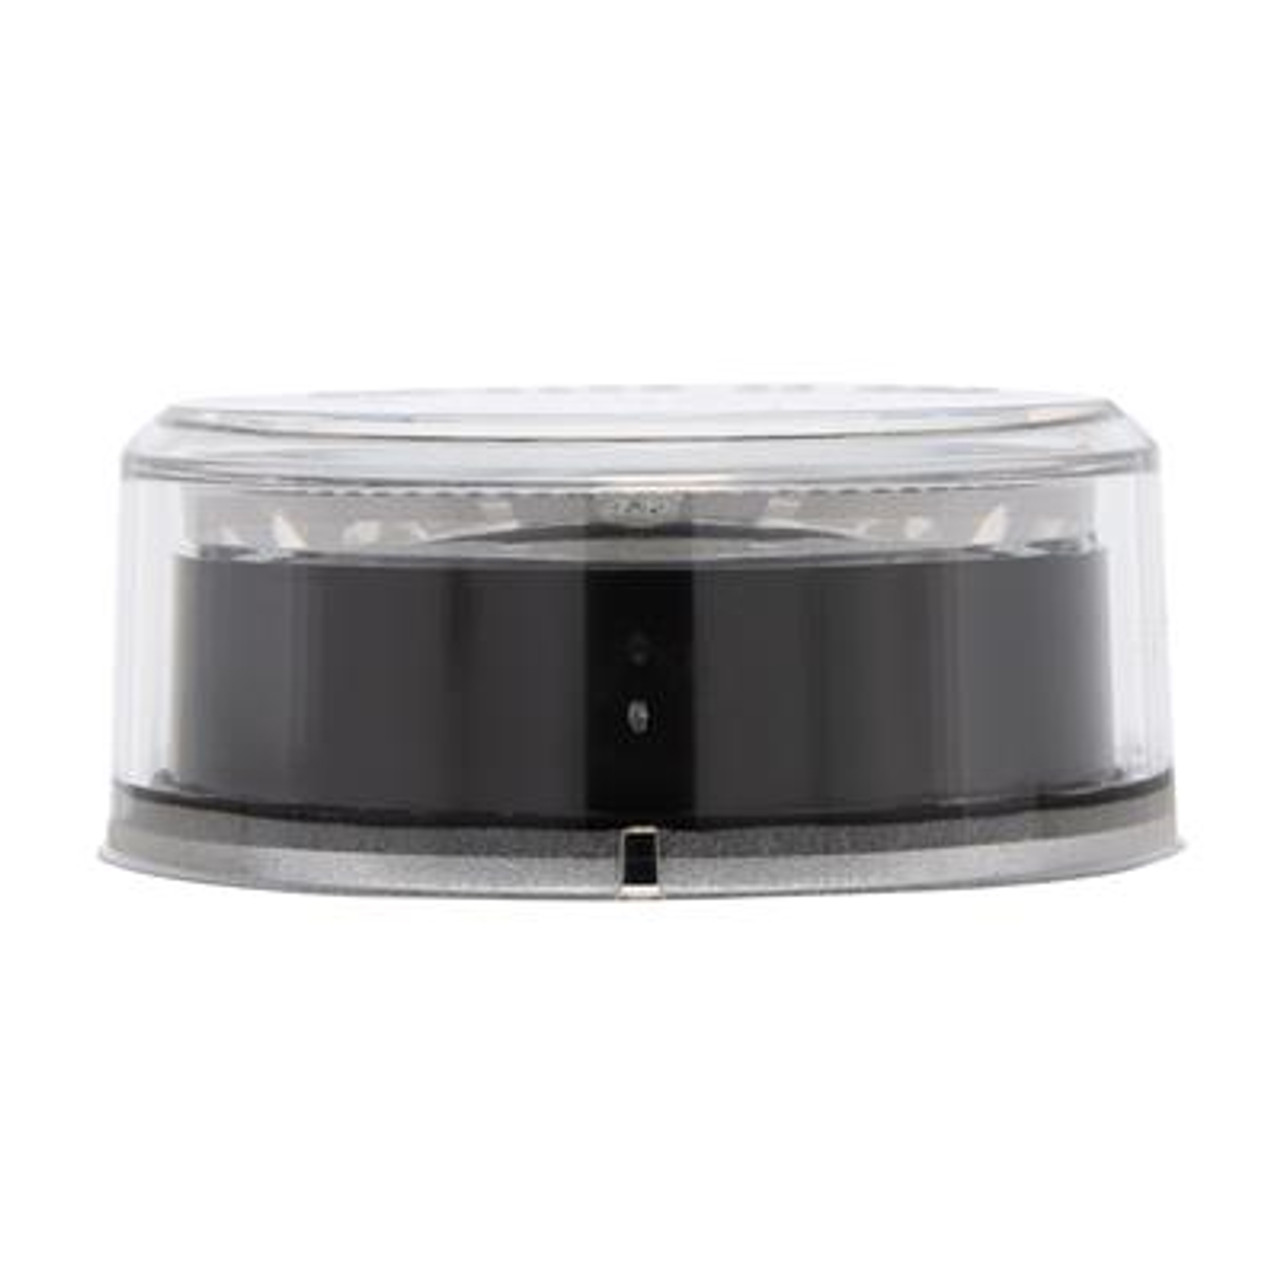 4 LED 2-1/2" Round Abyss Light (Clearance/Marker) - White LED/Clear Lens